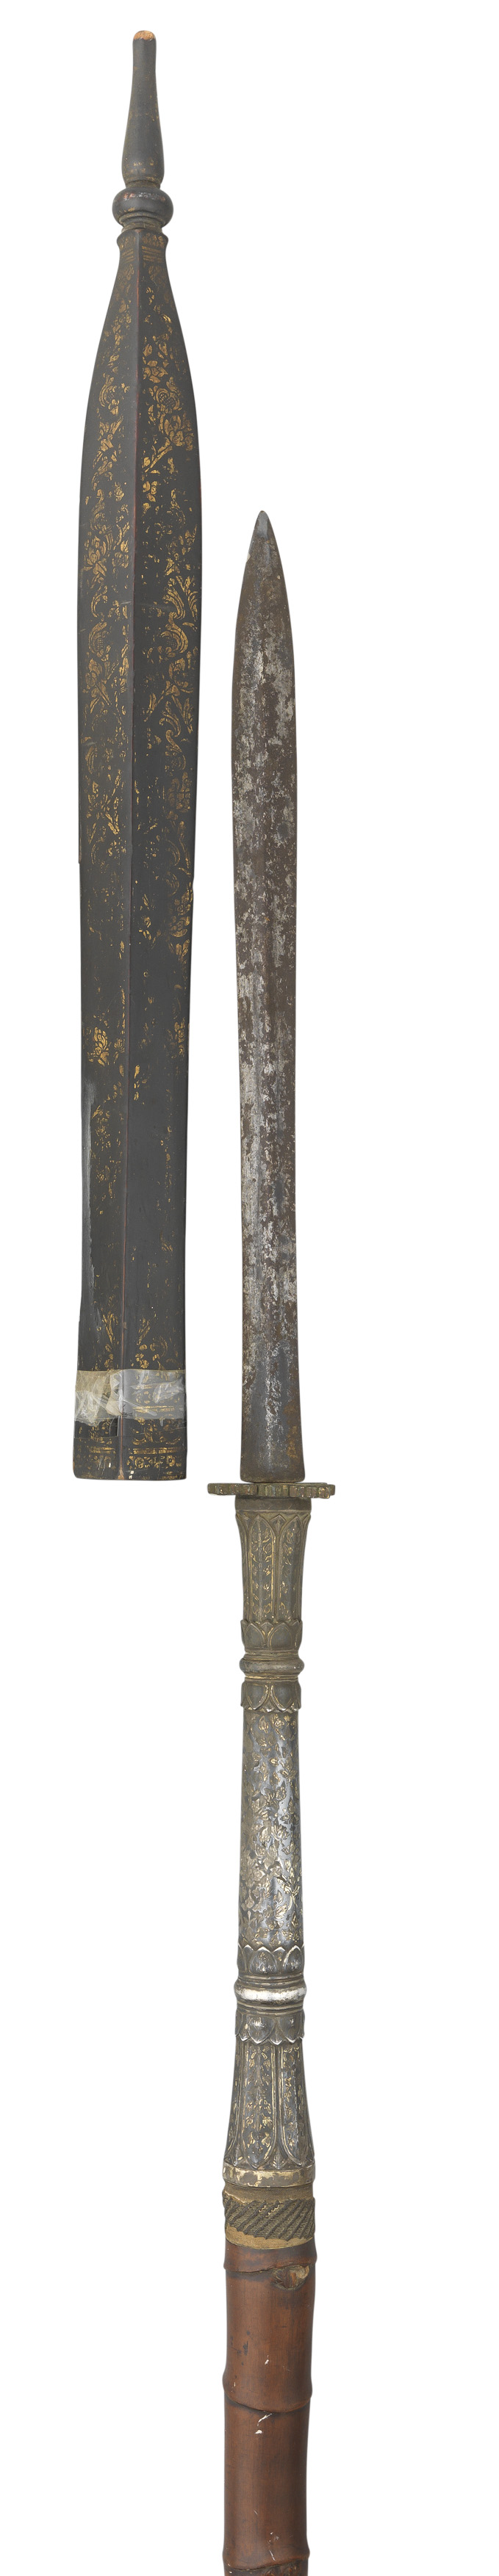 A SOUTHEAST ASIAN SPEAR, 19TH CENTURY with robust slender leaf-shaped head of diamond-section,